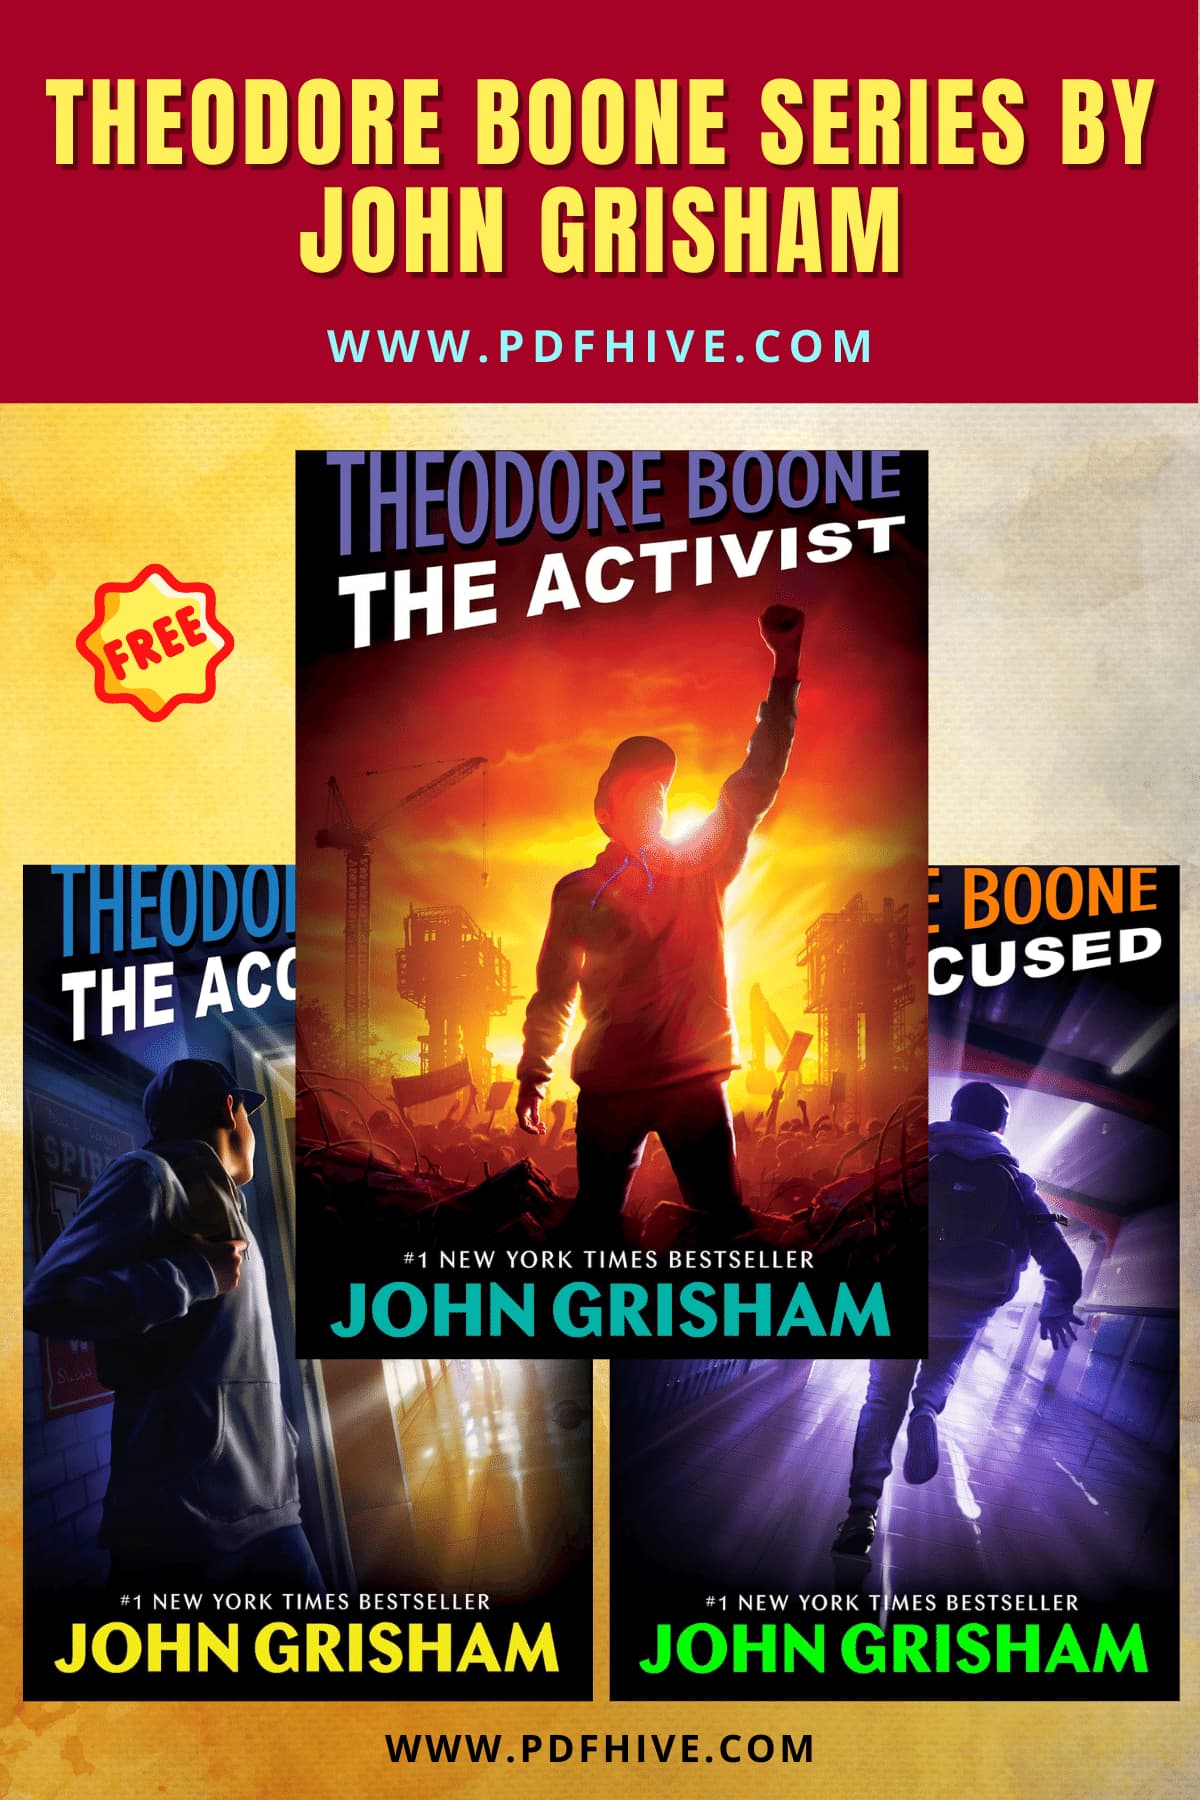 If you've read John Grisham's novels, you're probably familiar with her Theodore Boone series, which is available in free audiobooks, hardcover, Kindle, & paperbacks.